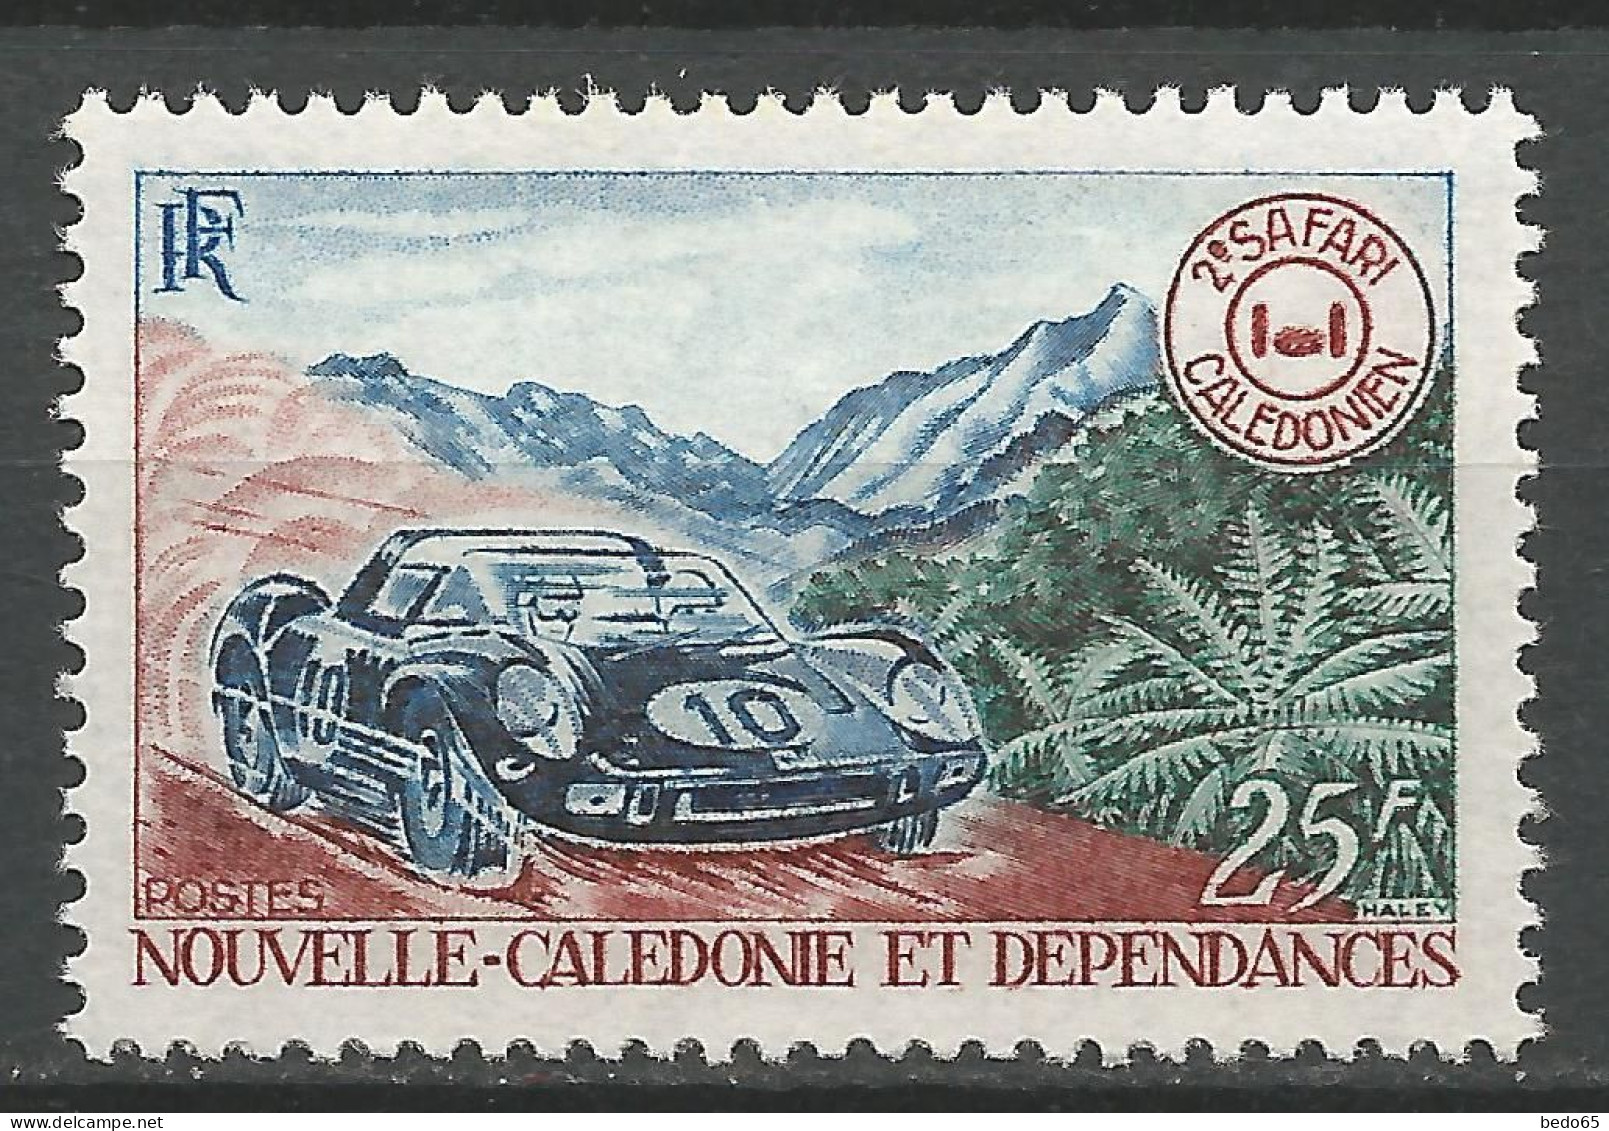 NOUVELLE-CALEDONIE N° 355 NEUF** LUXE SANS CHARNIERE / Hingeless  / MNH - Nuevos